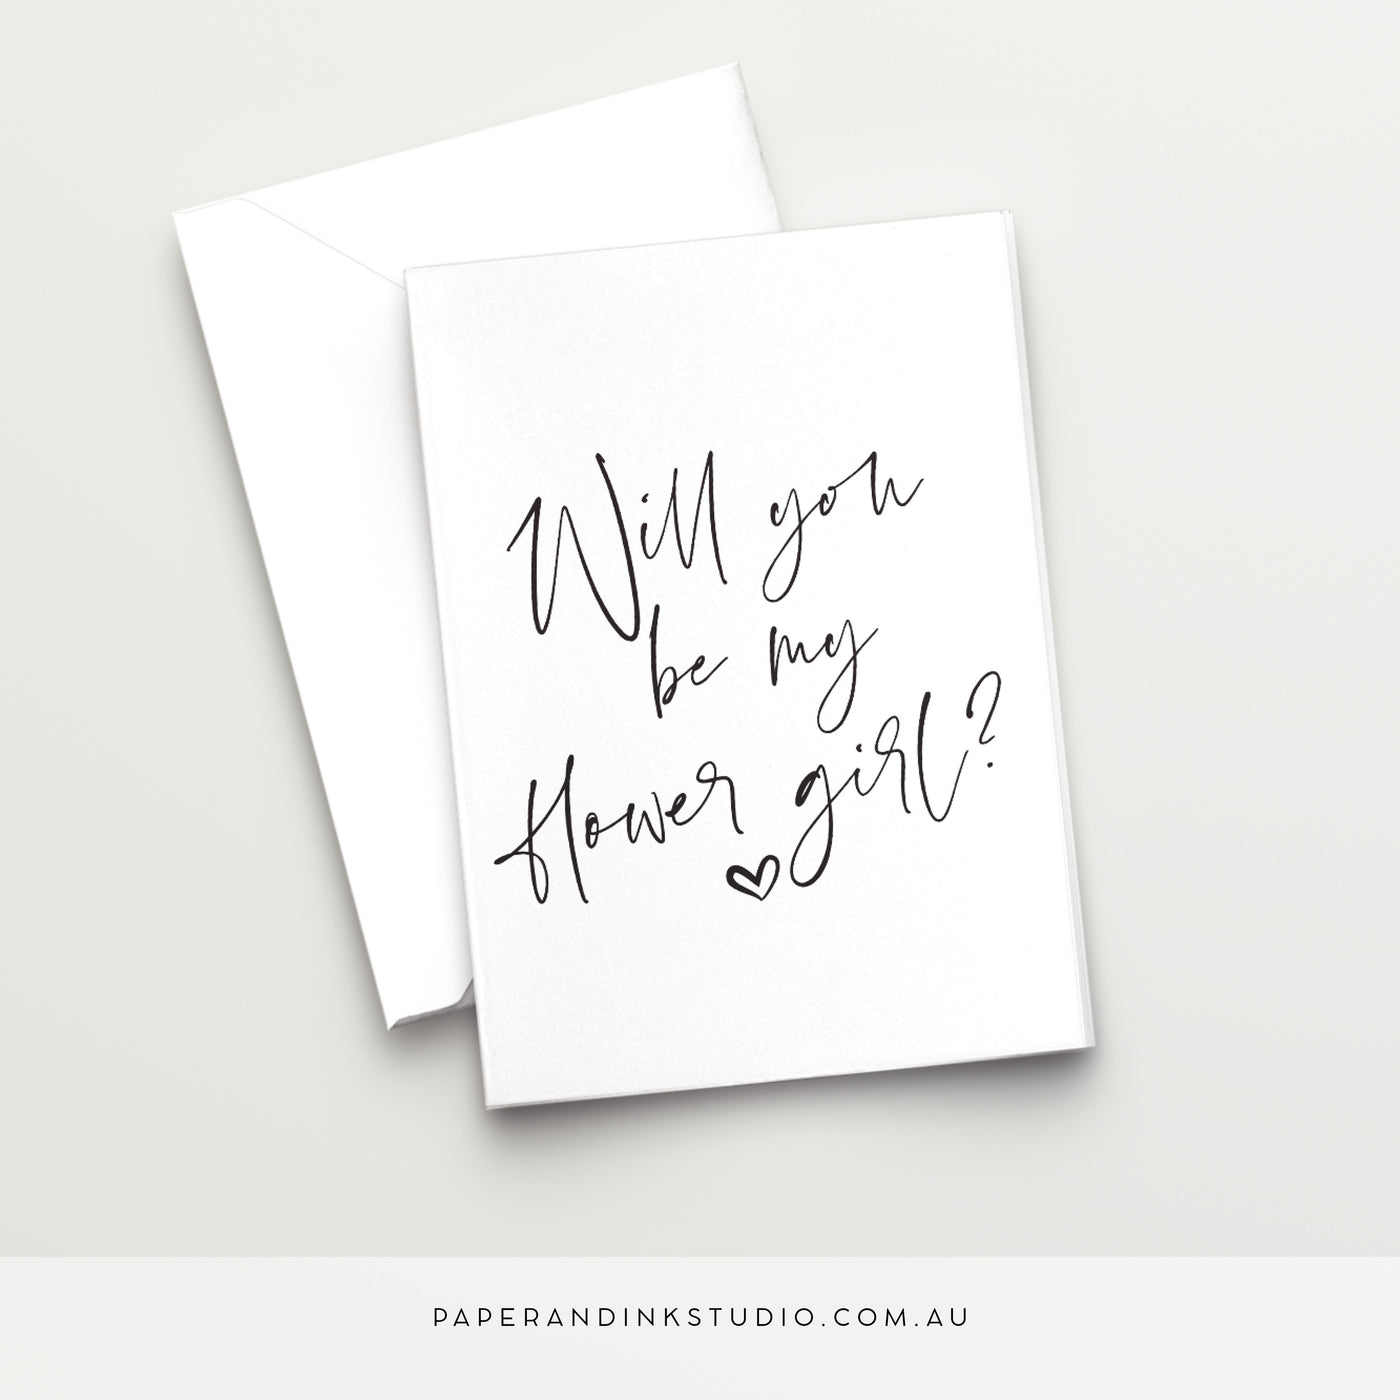 A white folded wedding or best woman card in a design called Thorne with black writing that says will you be my flower girl, asking your niece, child, godchild or friend's child to be your flower girl at your wedding.